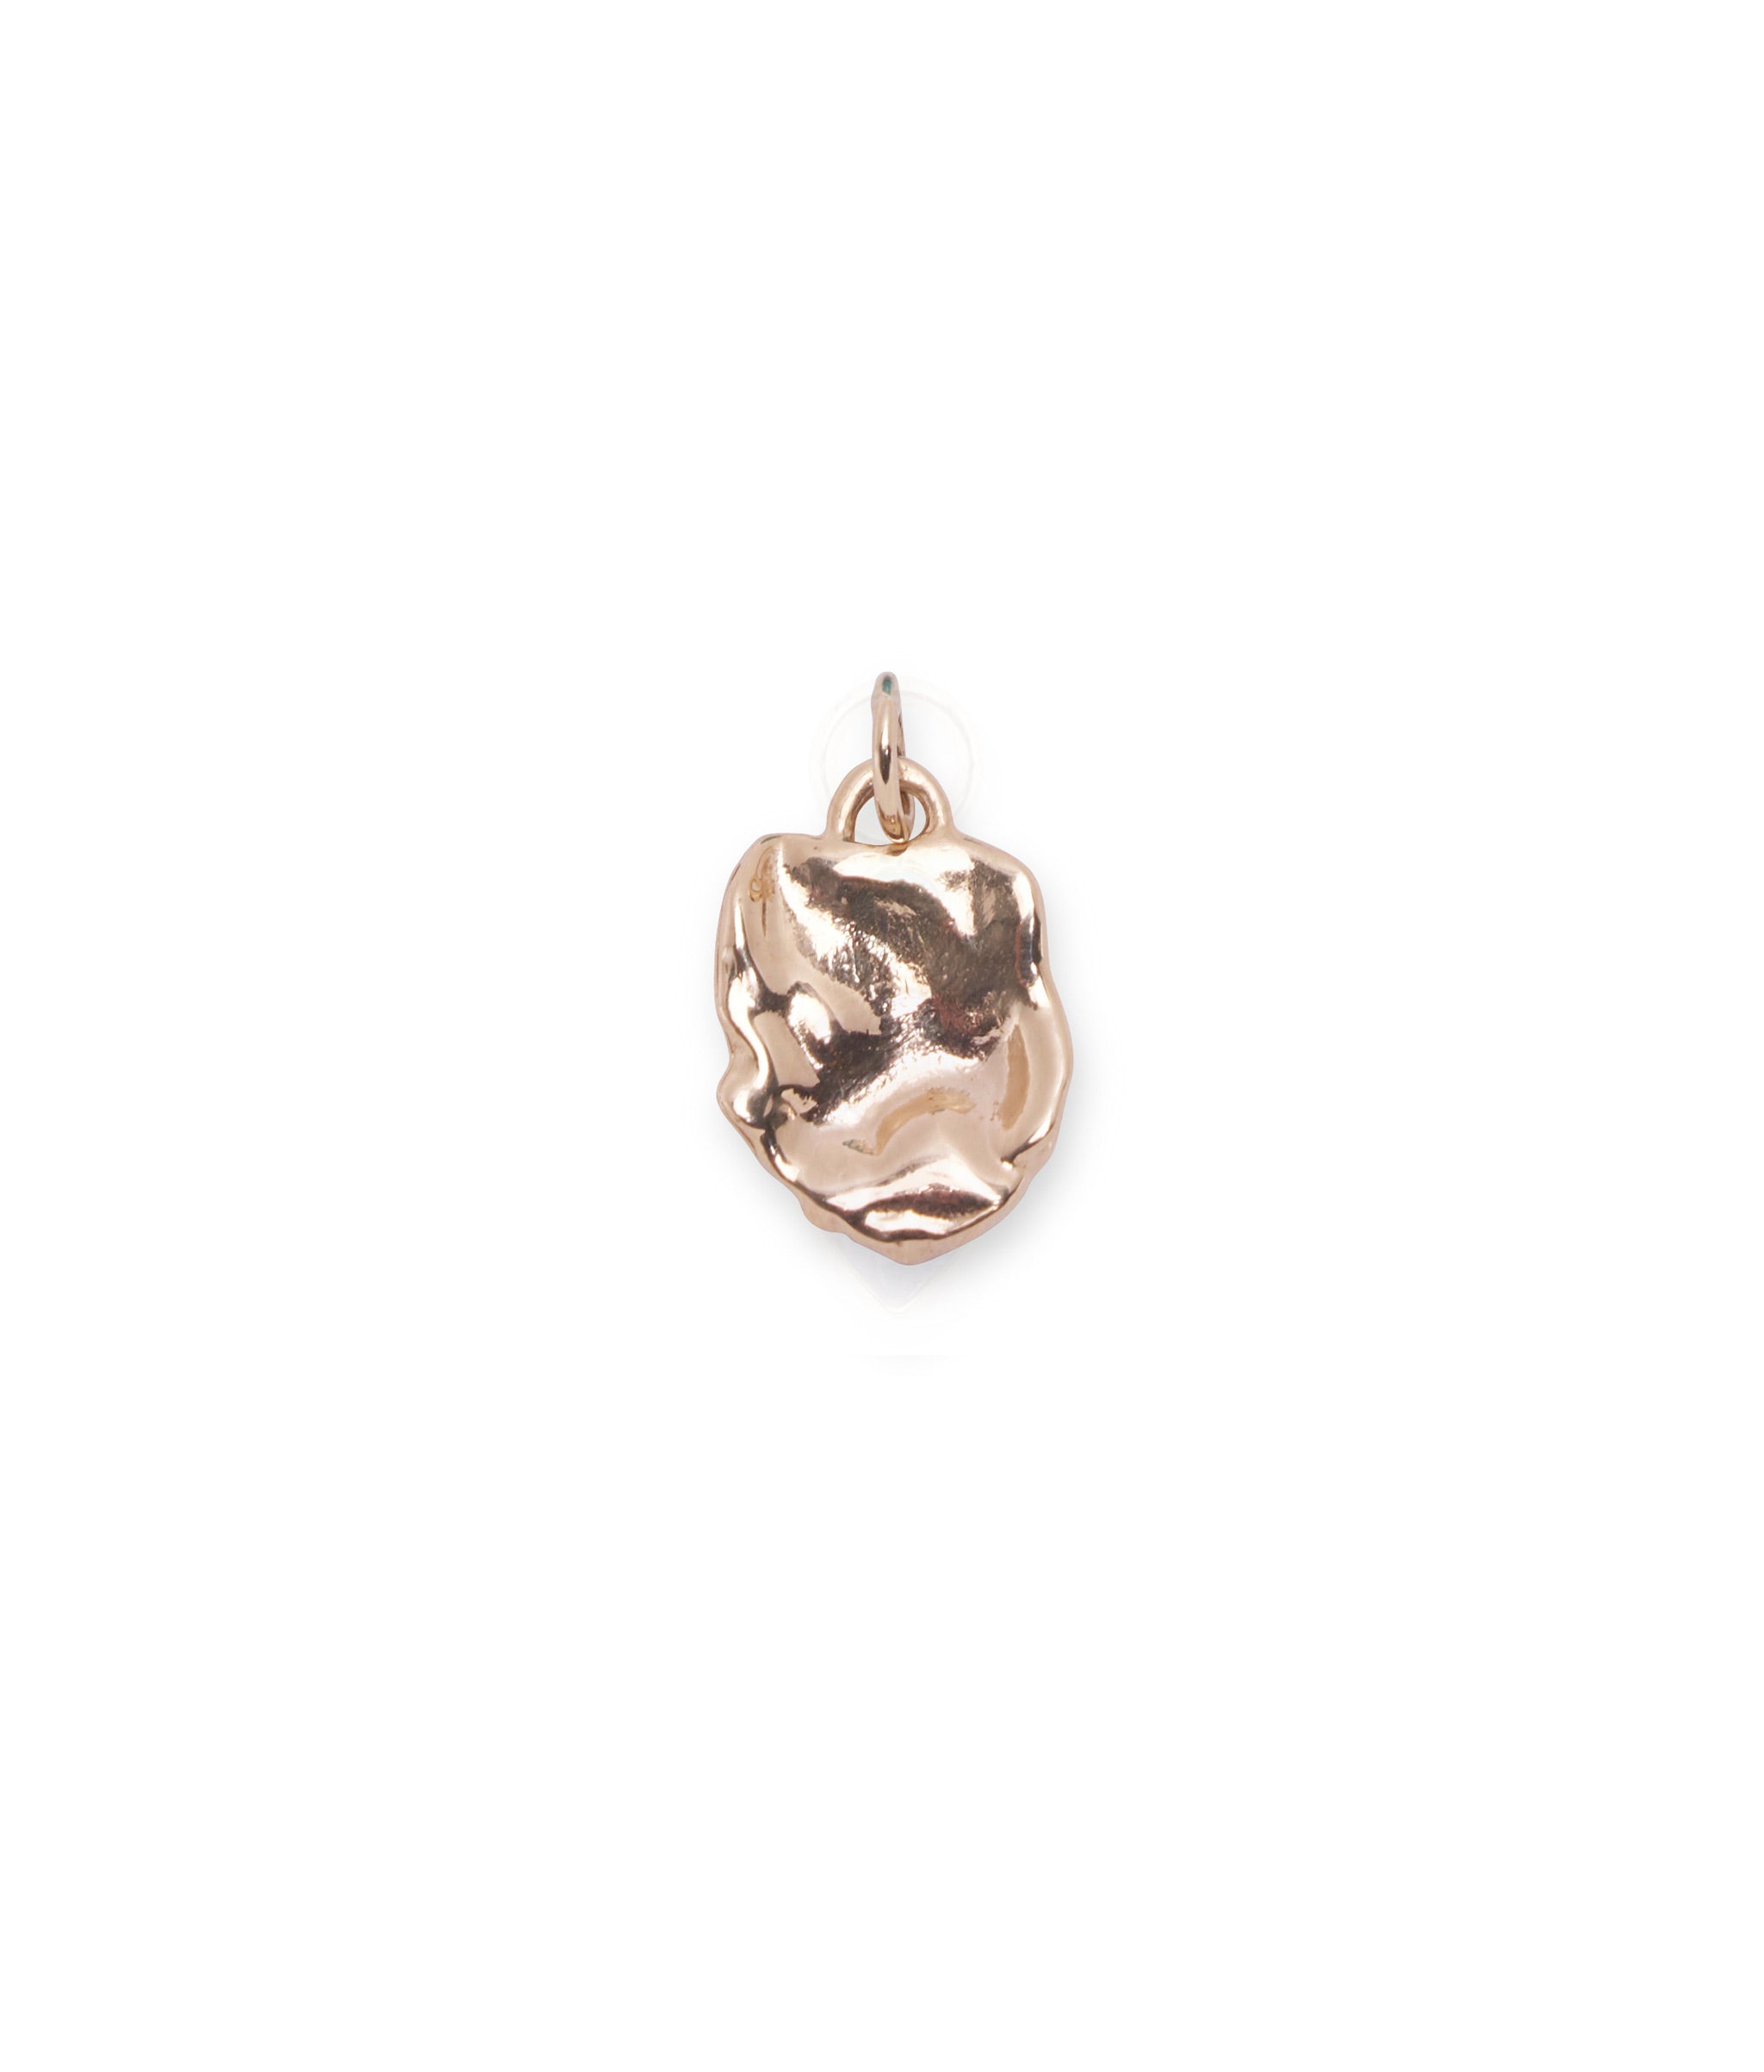 Solid 14K Wafer Necklace Charm. A solid 14k gold wafer charm. 